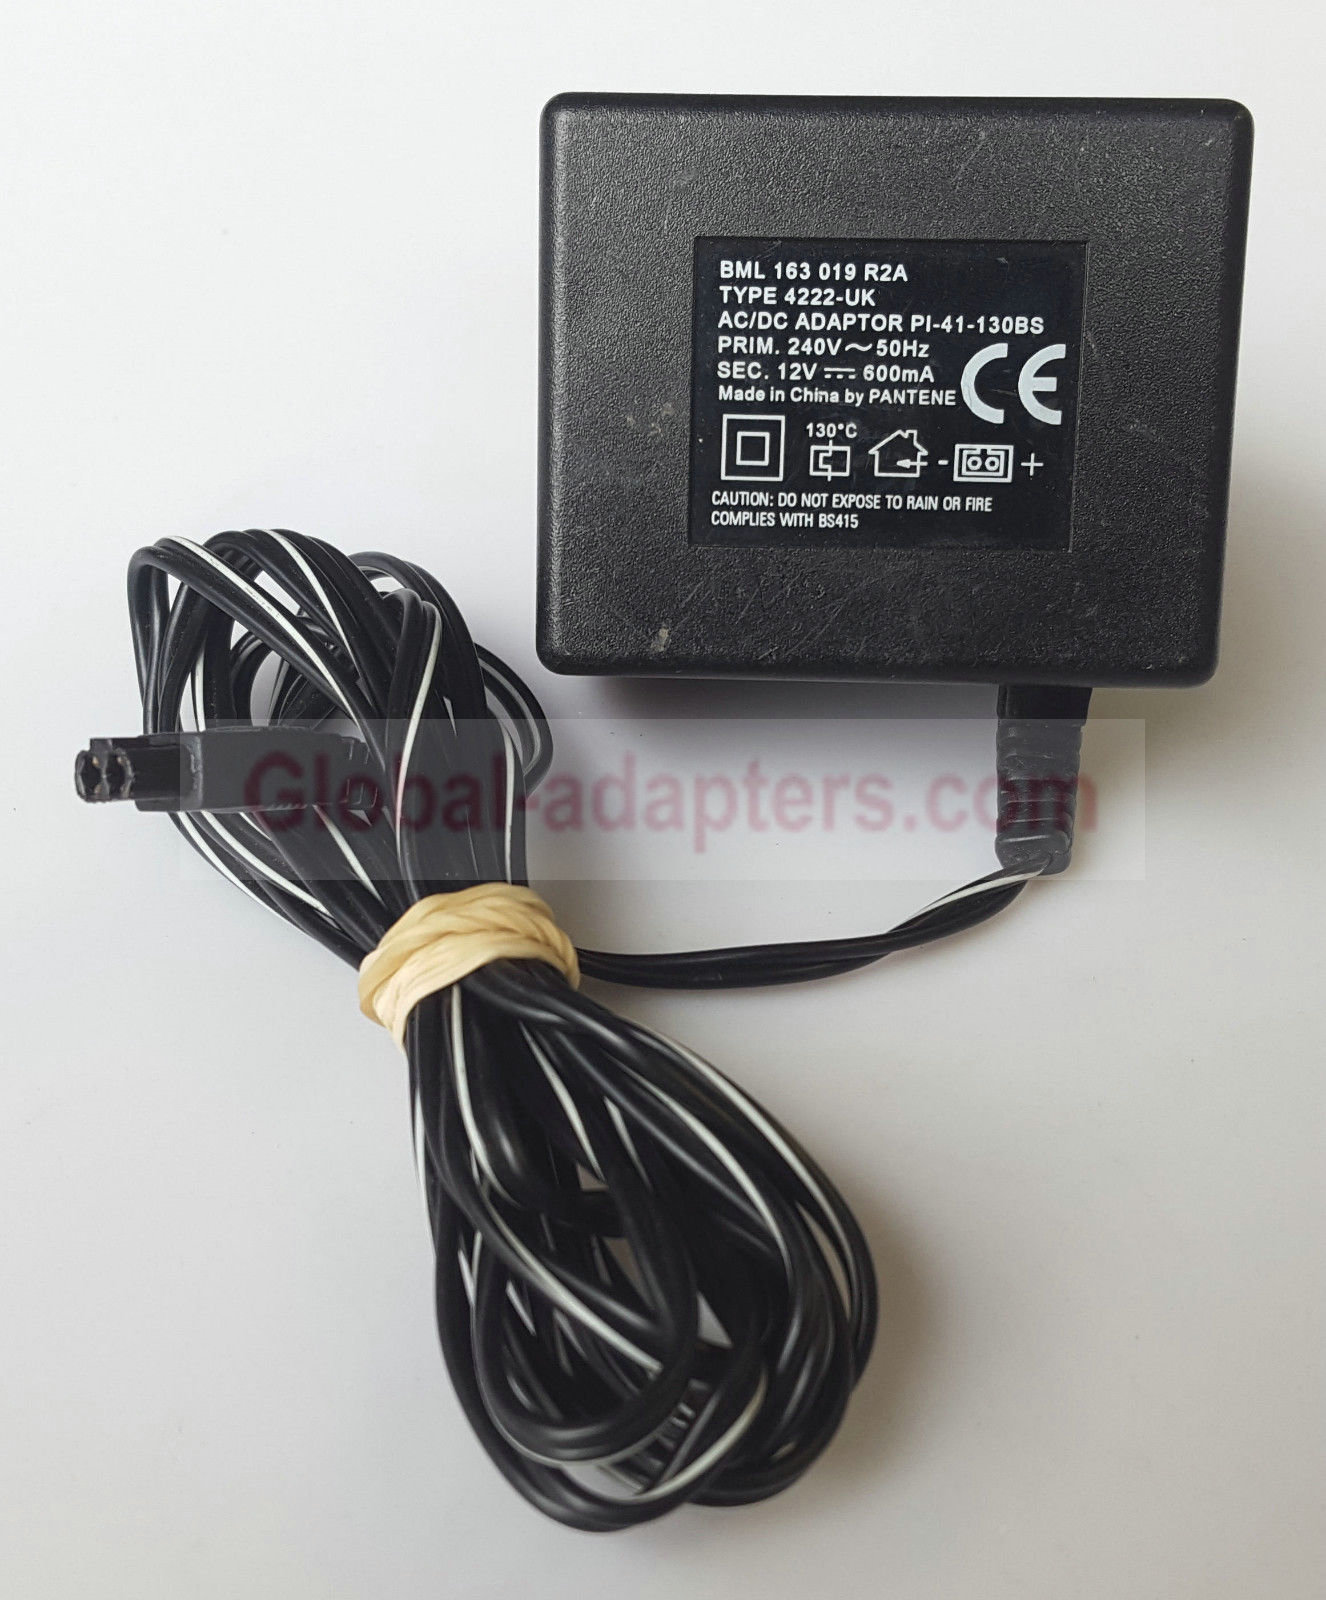 NEW 12V 0.6A PANTENE BML 163 019 R2A AC/DC POWER SUPPLY ADAPTER 4222-UK